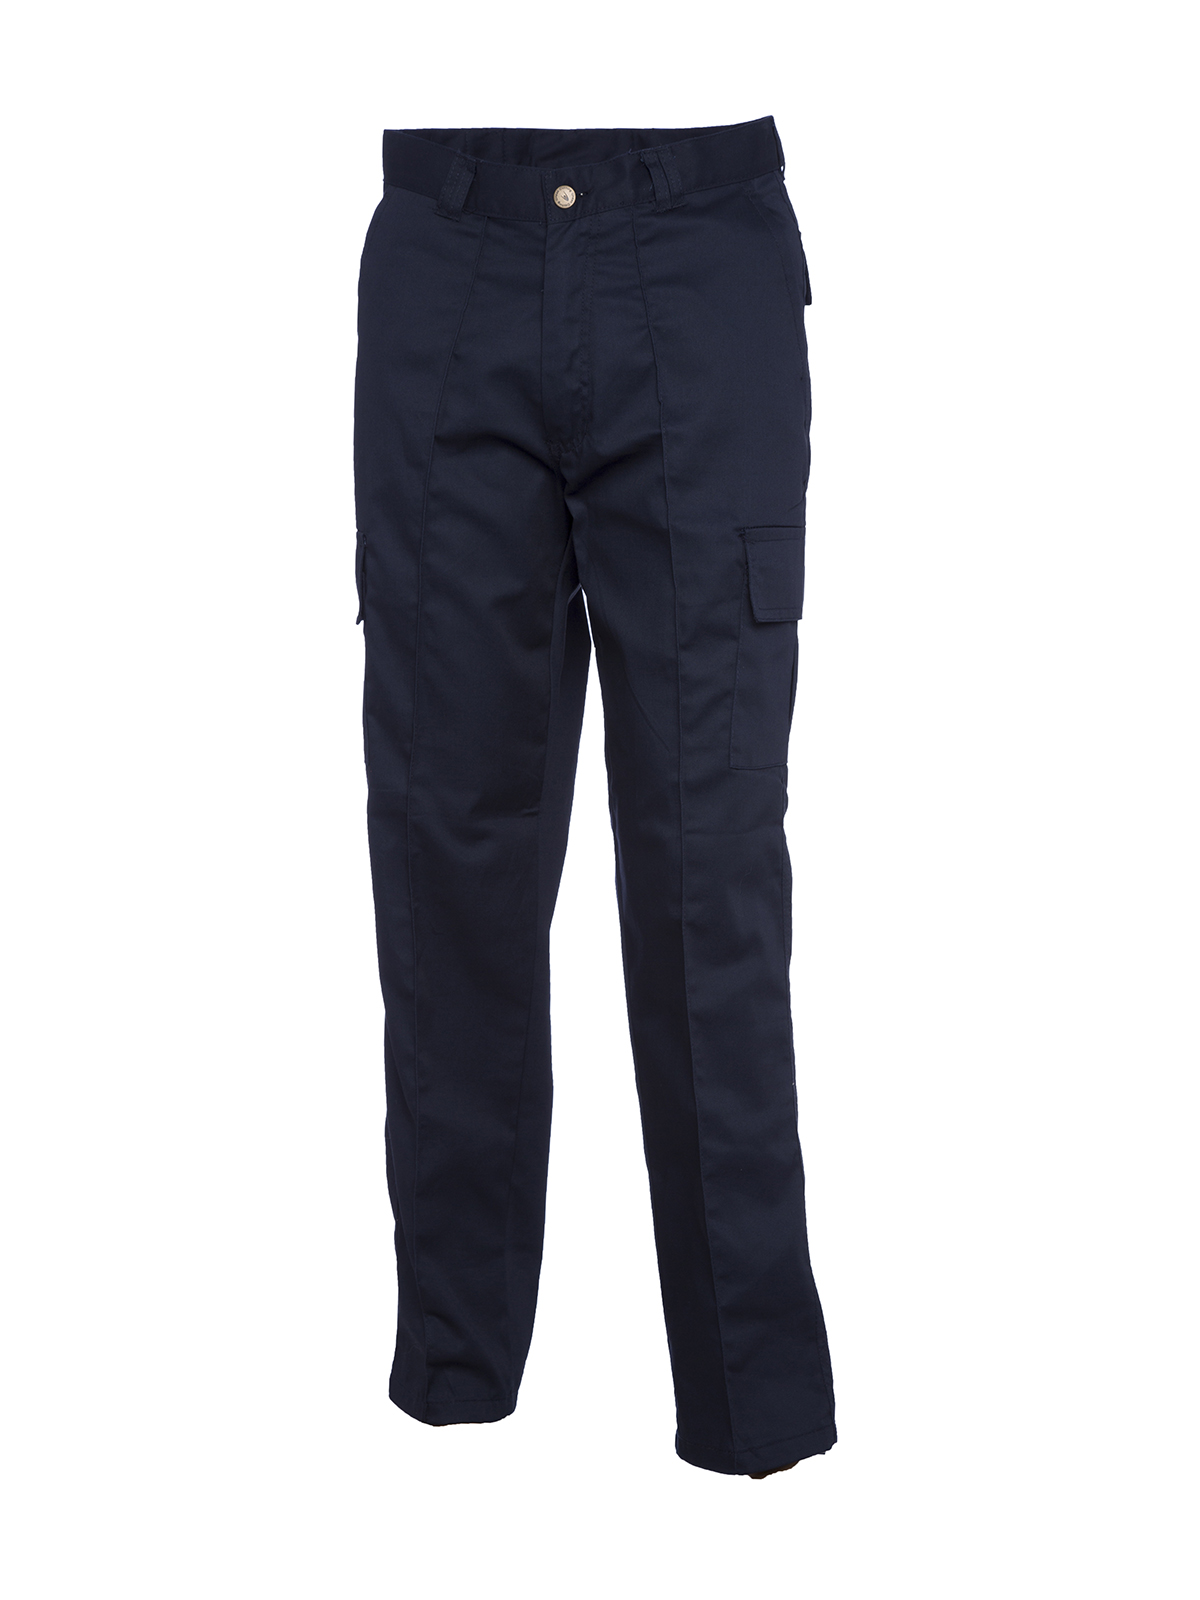 Cargo Trousers, Navy Blue - 34S